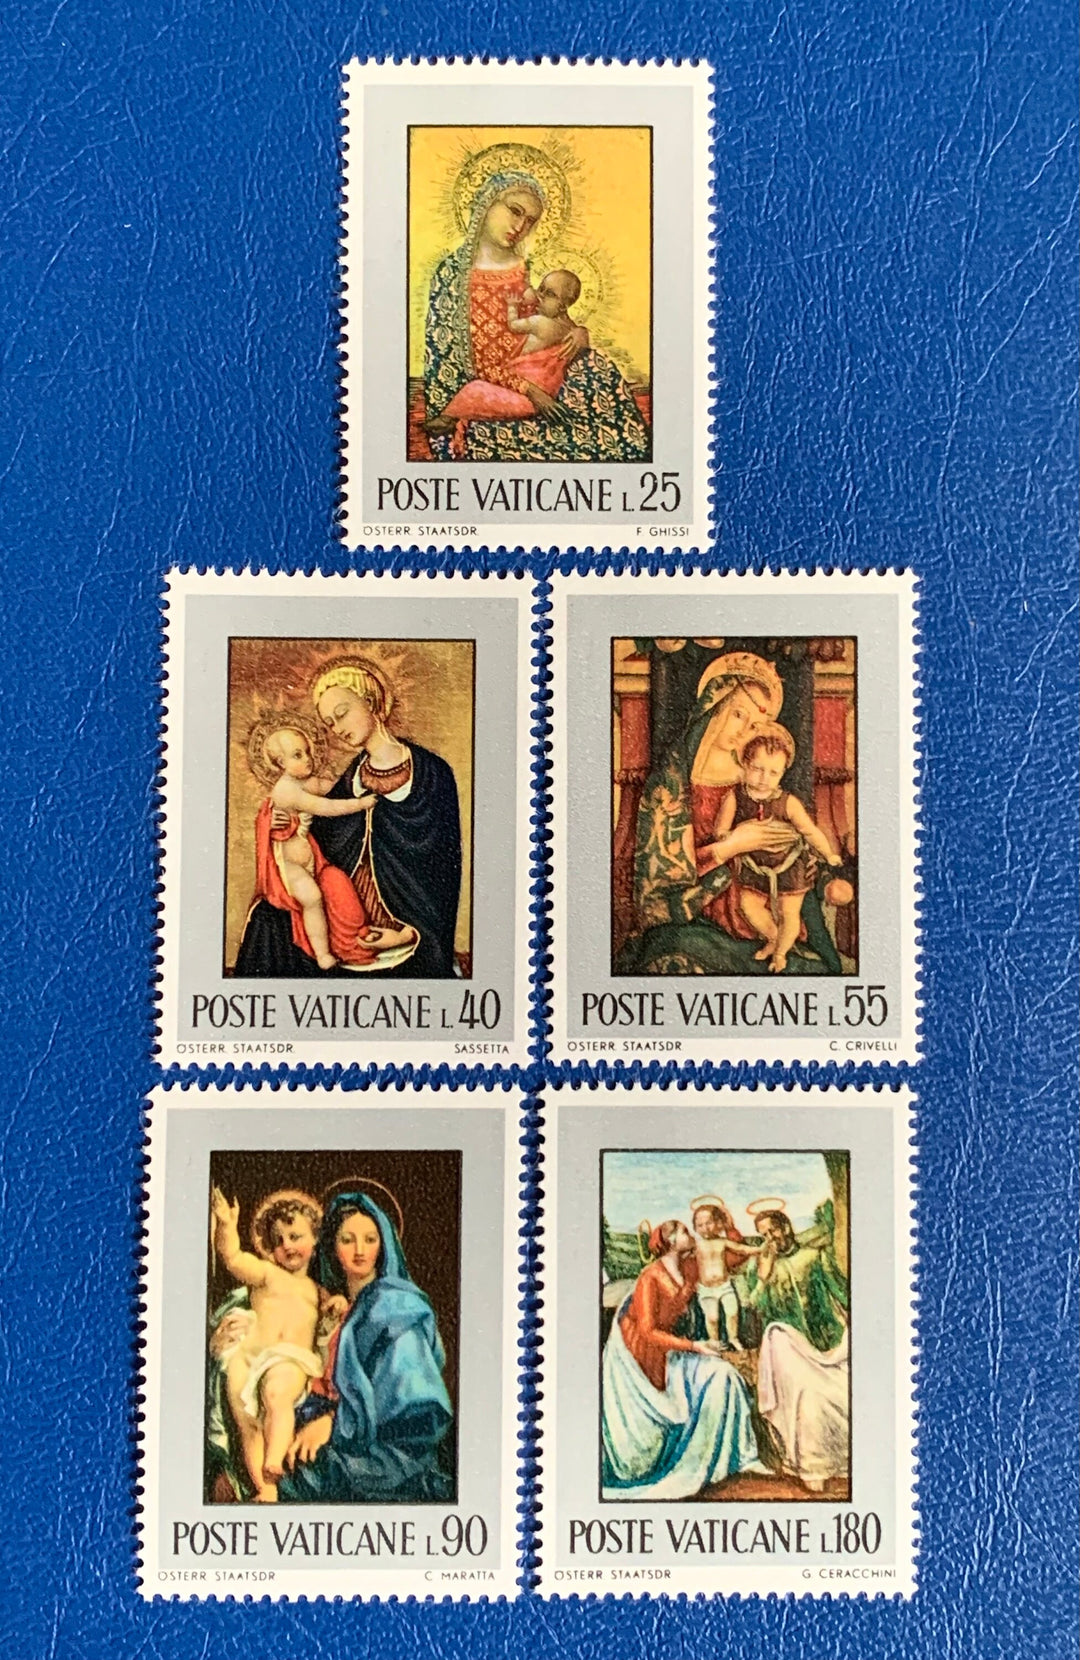 Vatican - Original Vintage Postage Stamps- 1971 - The Family - for the collector, artist or crafter